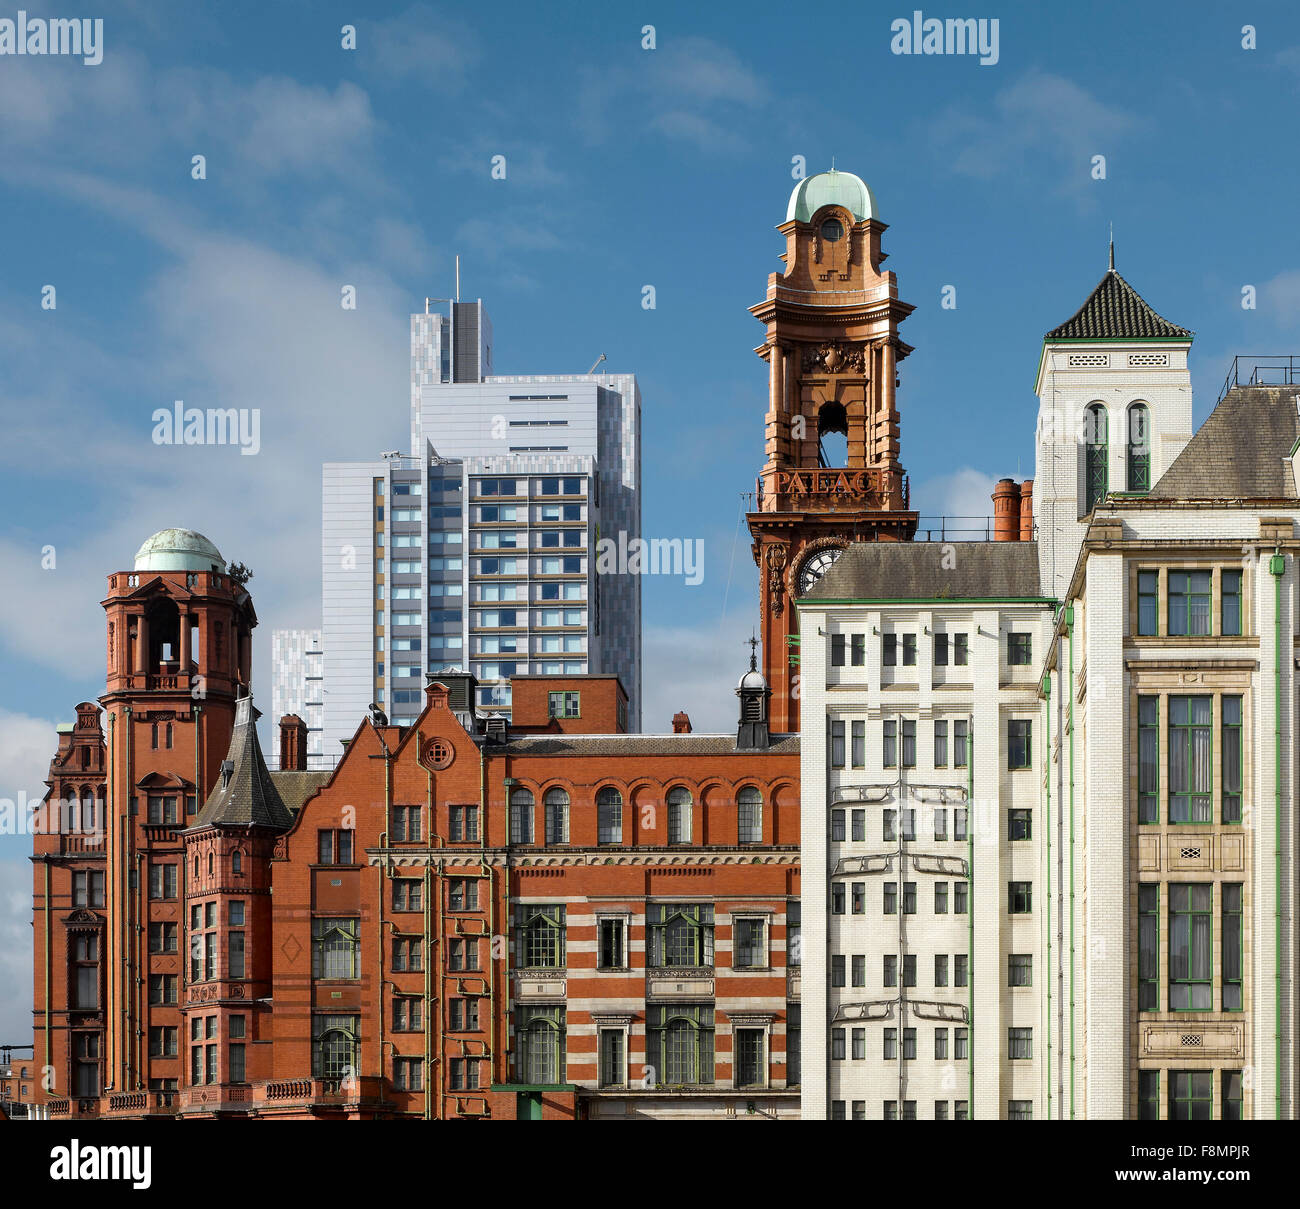 Contrast of architectural styles, old and new buildings in Manchester includes modern tower of student accommodation Stock Photo